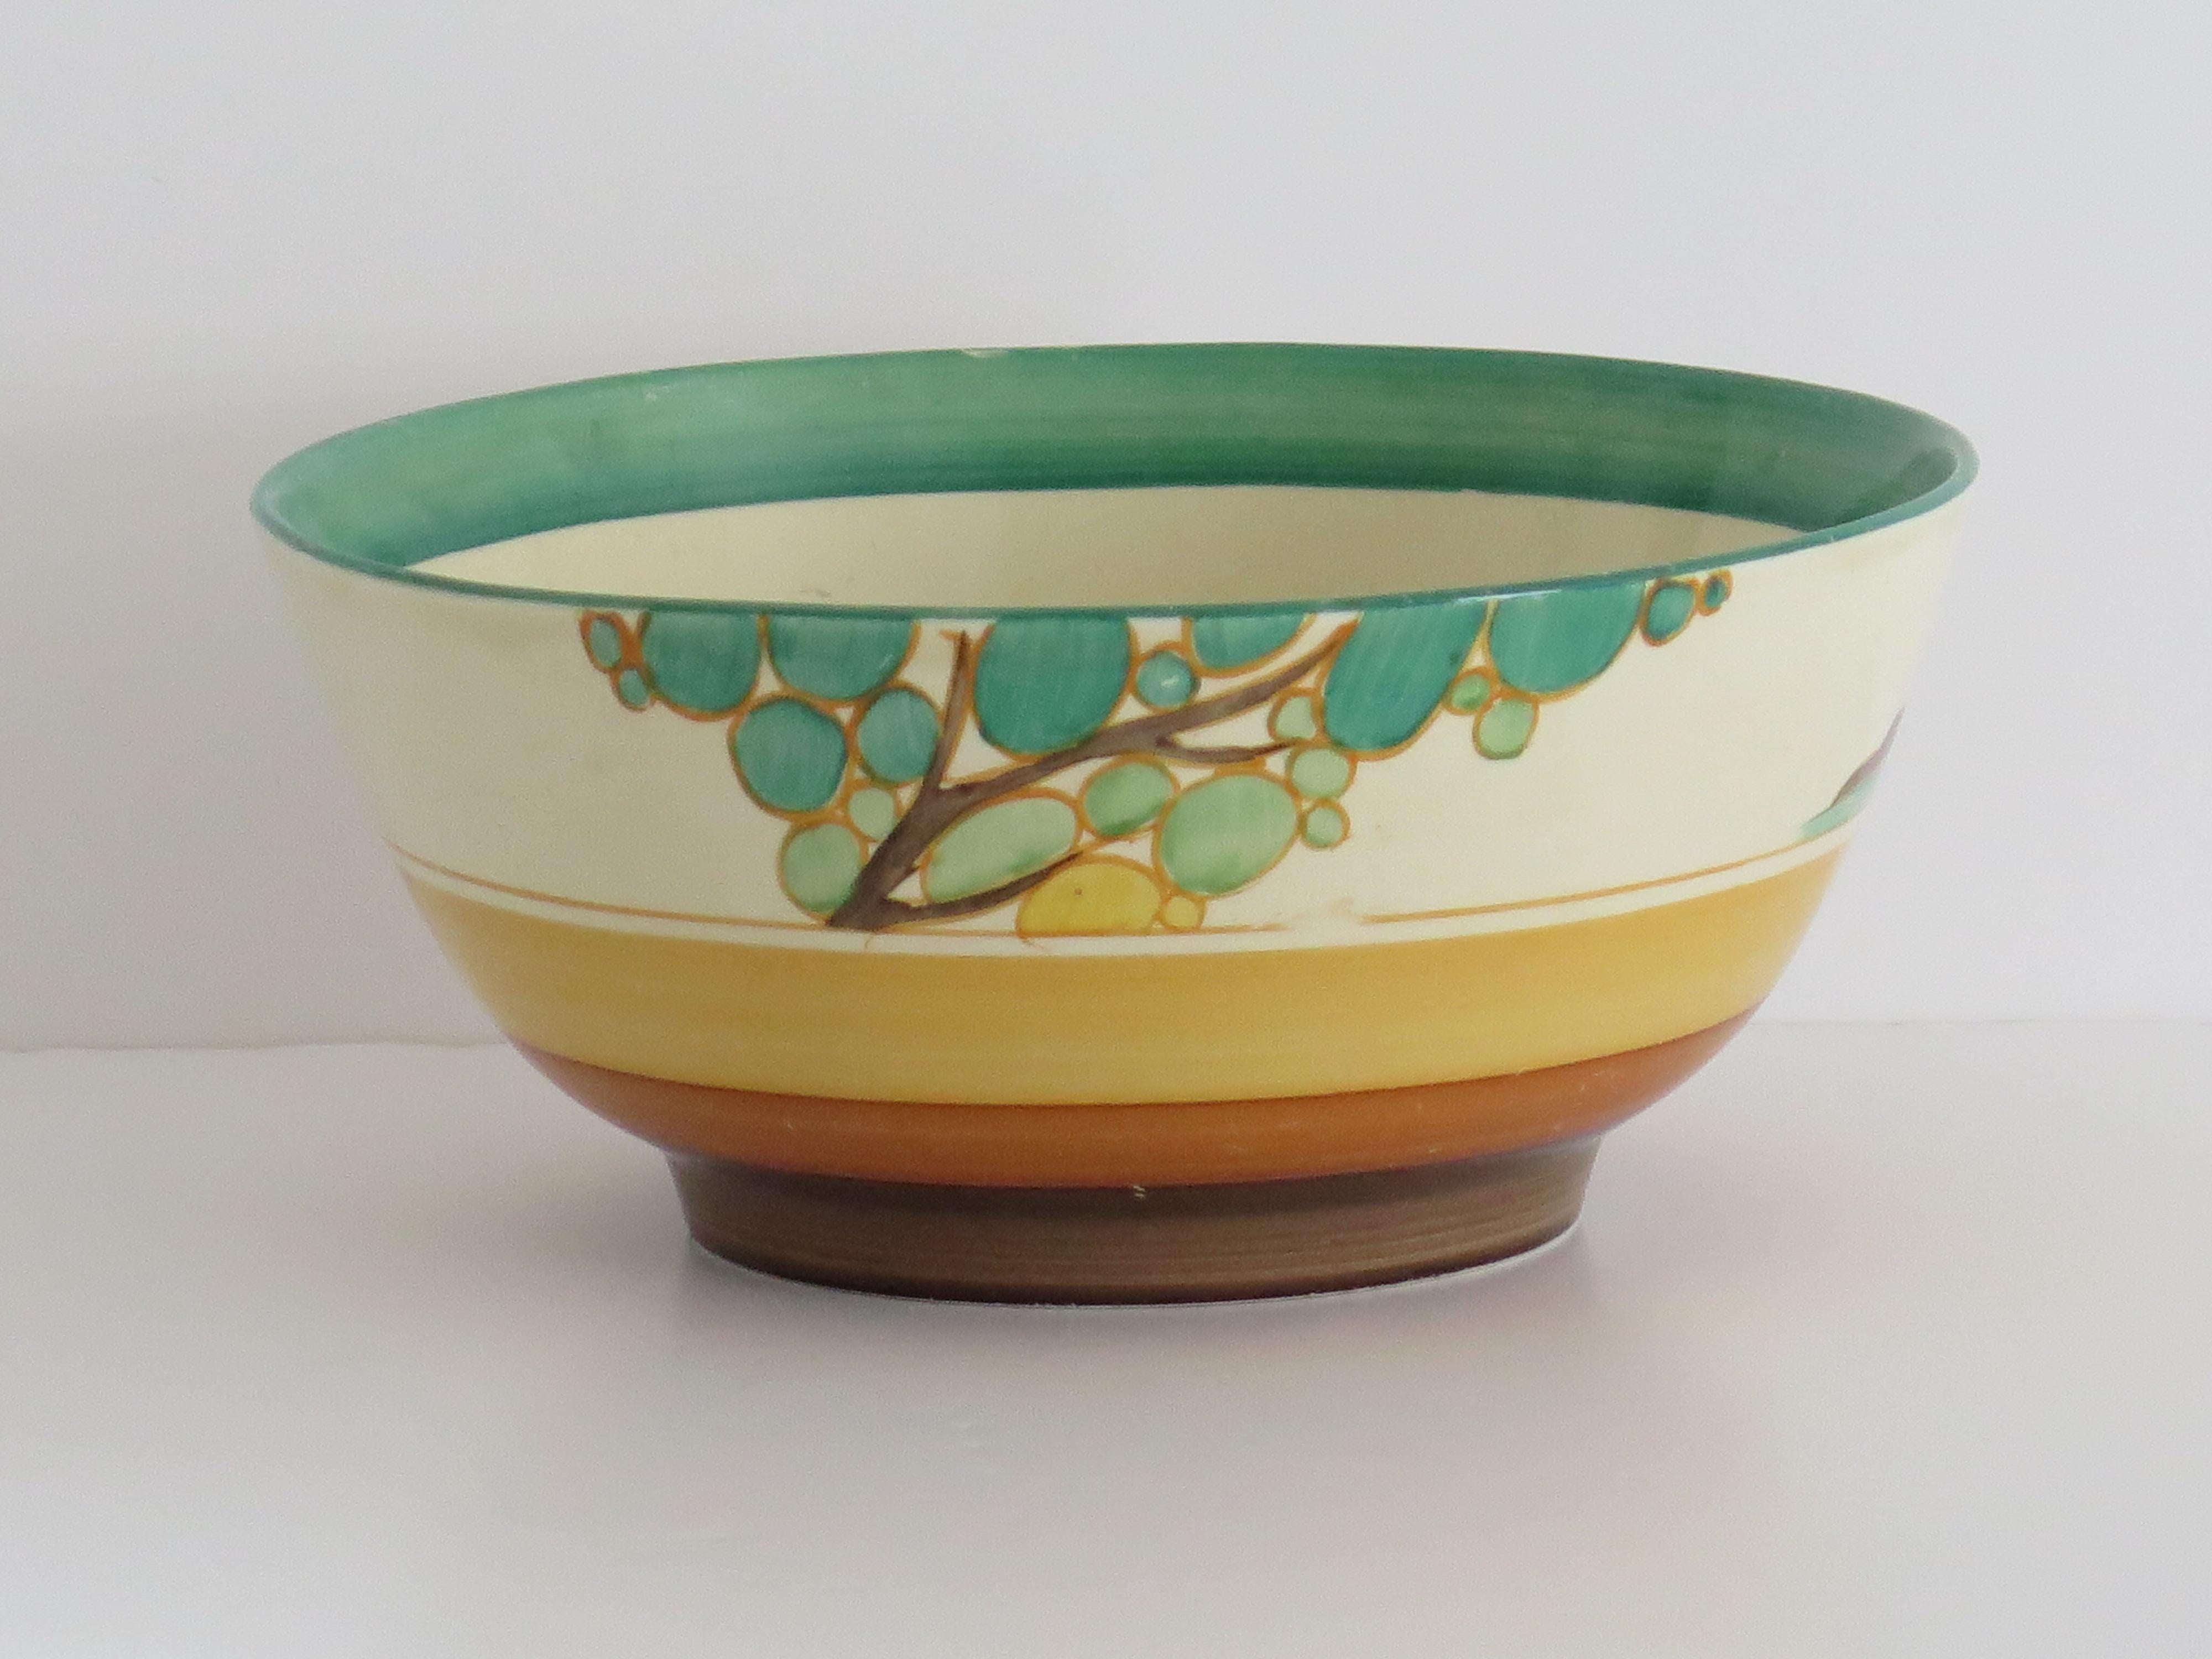 This is a good hand-painted Clarice Cliff Bowl of 8 inches diameter, in the classic landscape Bizarre Fantasque pattern called Secrets.

The bowl is well potted on a low foot with all hand painted decoration.

The decoration has a river estuary next